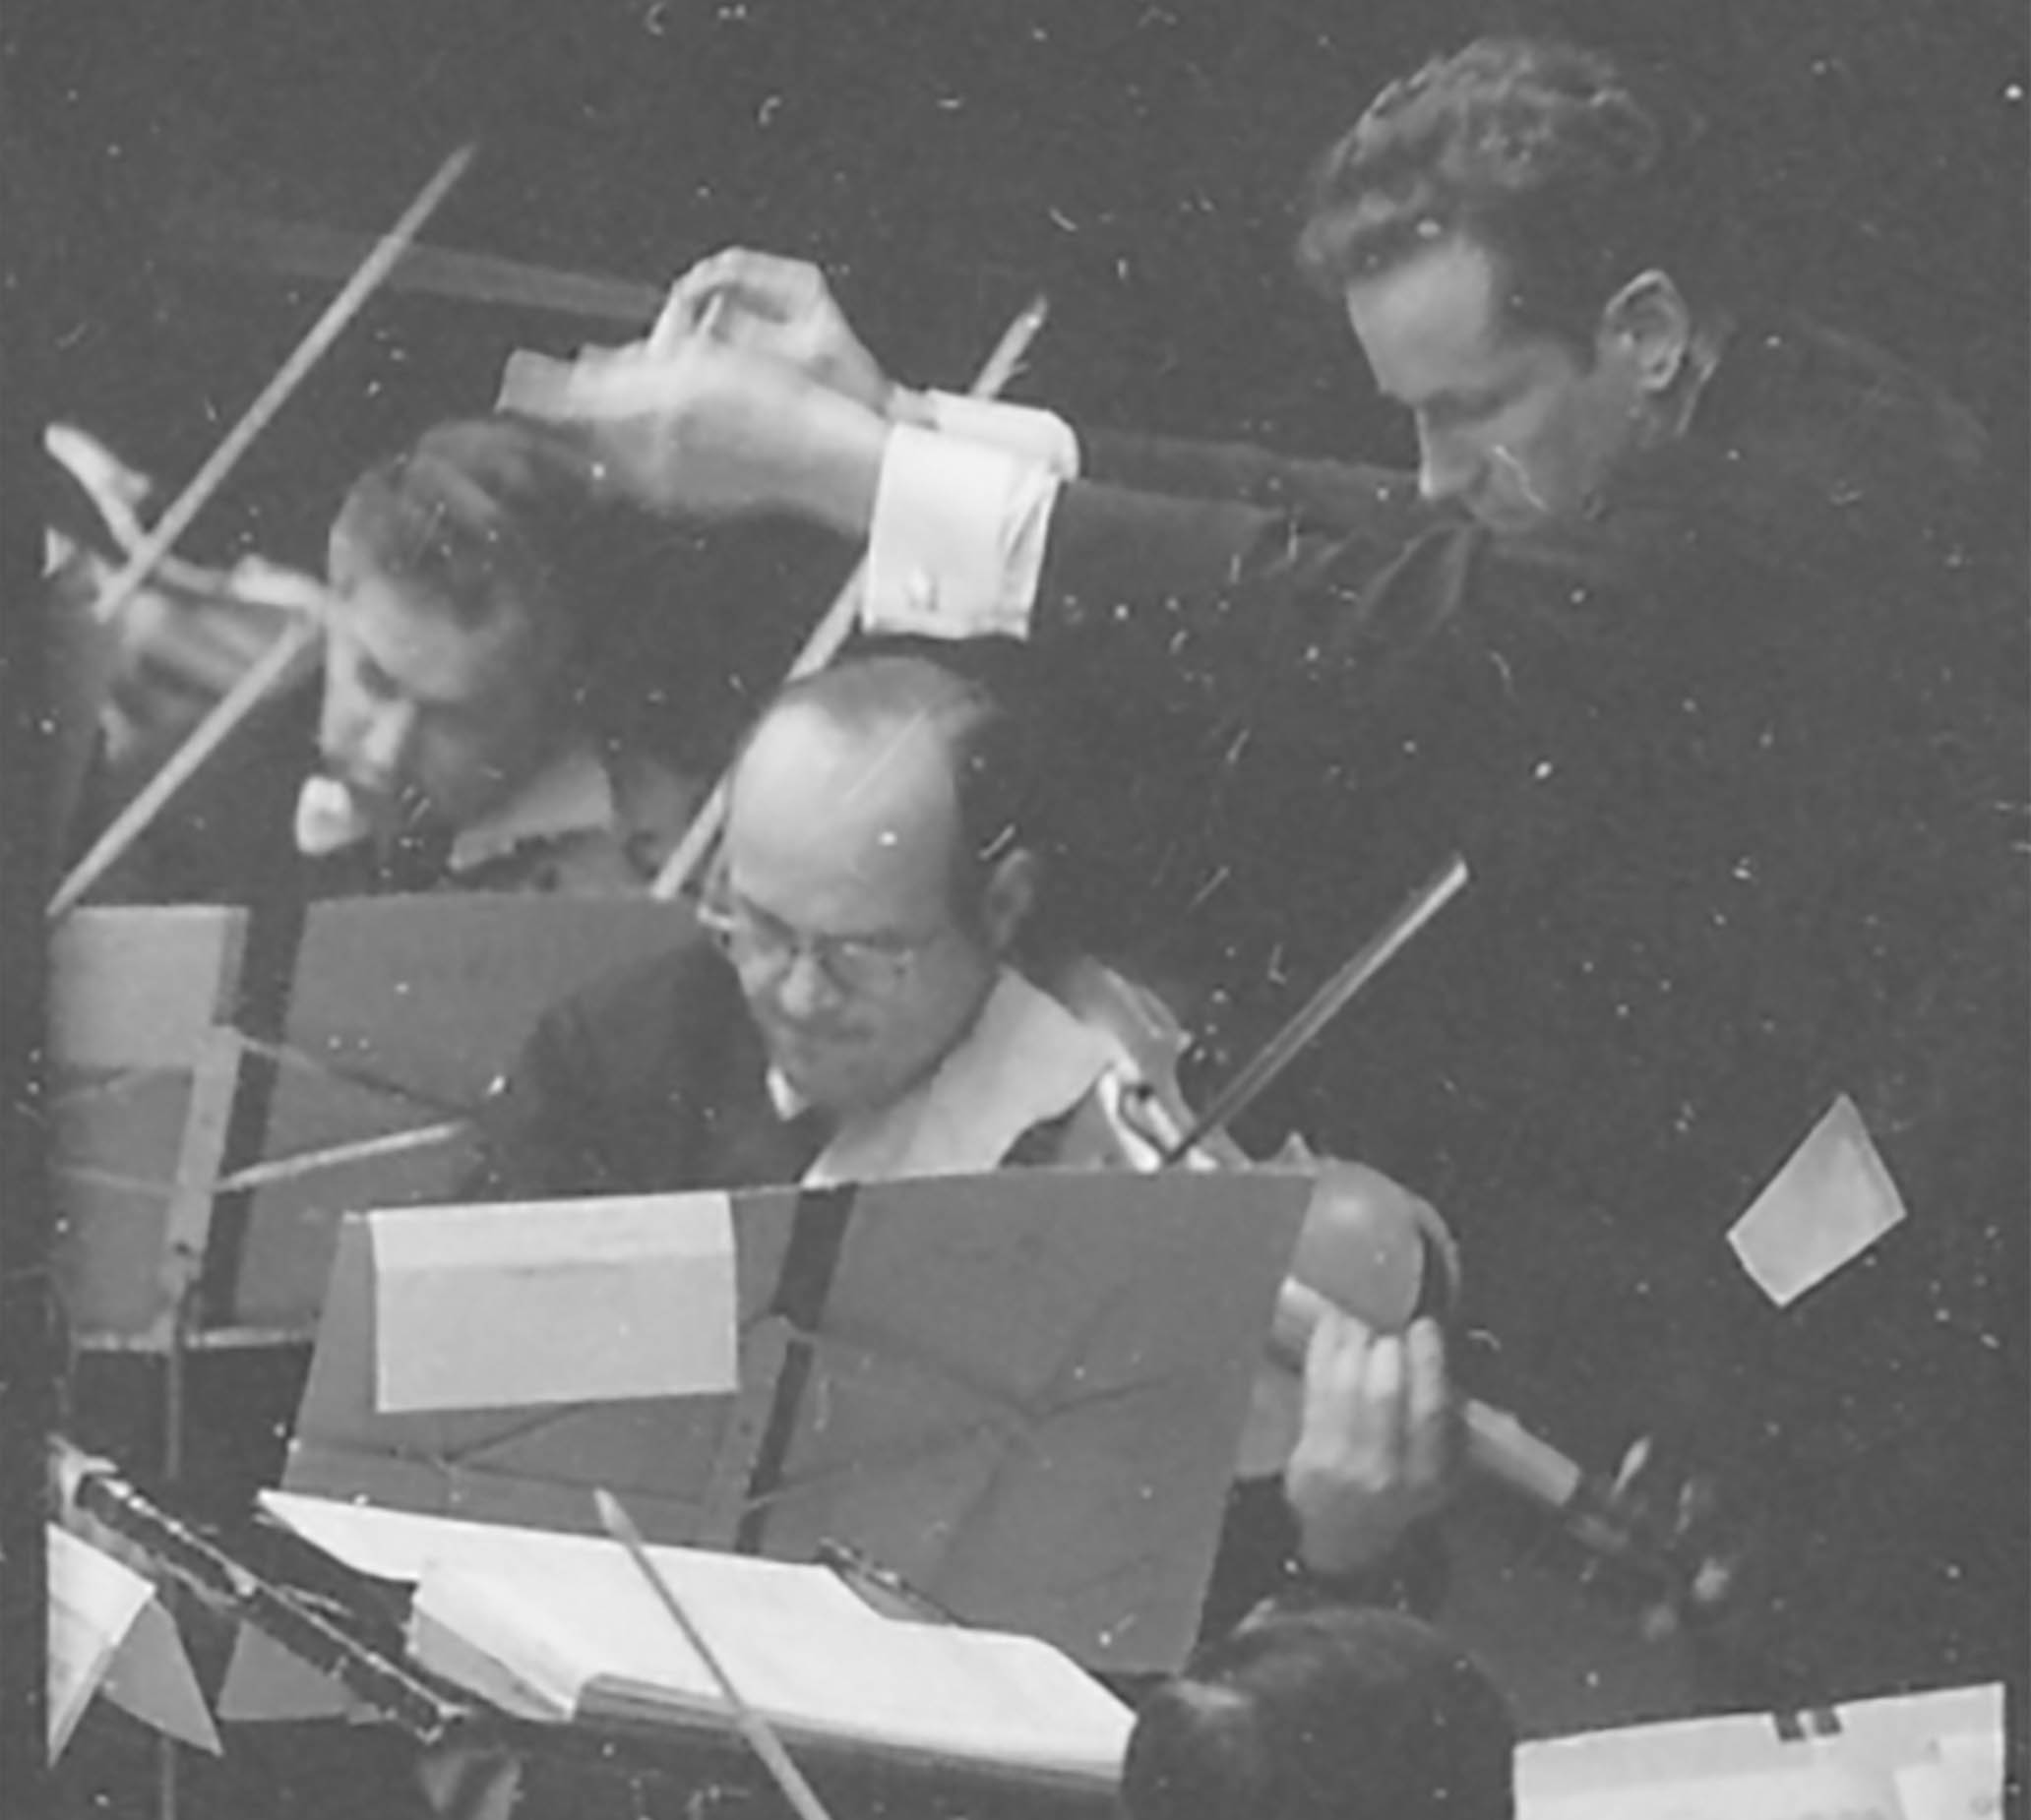 A youthful Louis Lane conducts the Orchestra. Everyone wears a serious, intense expression.t